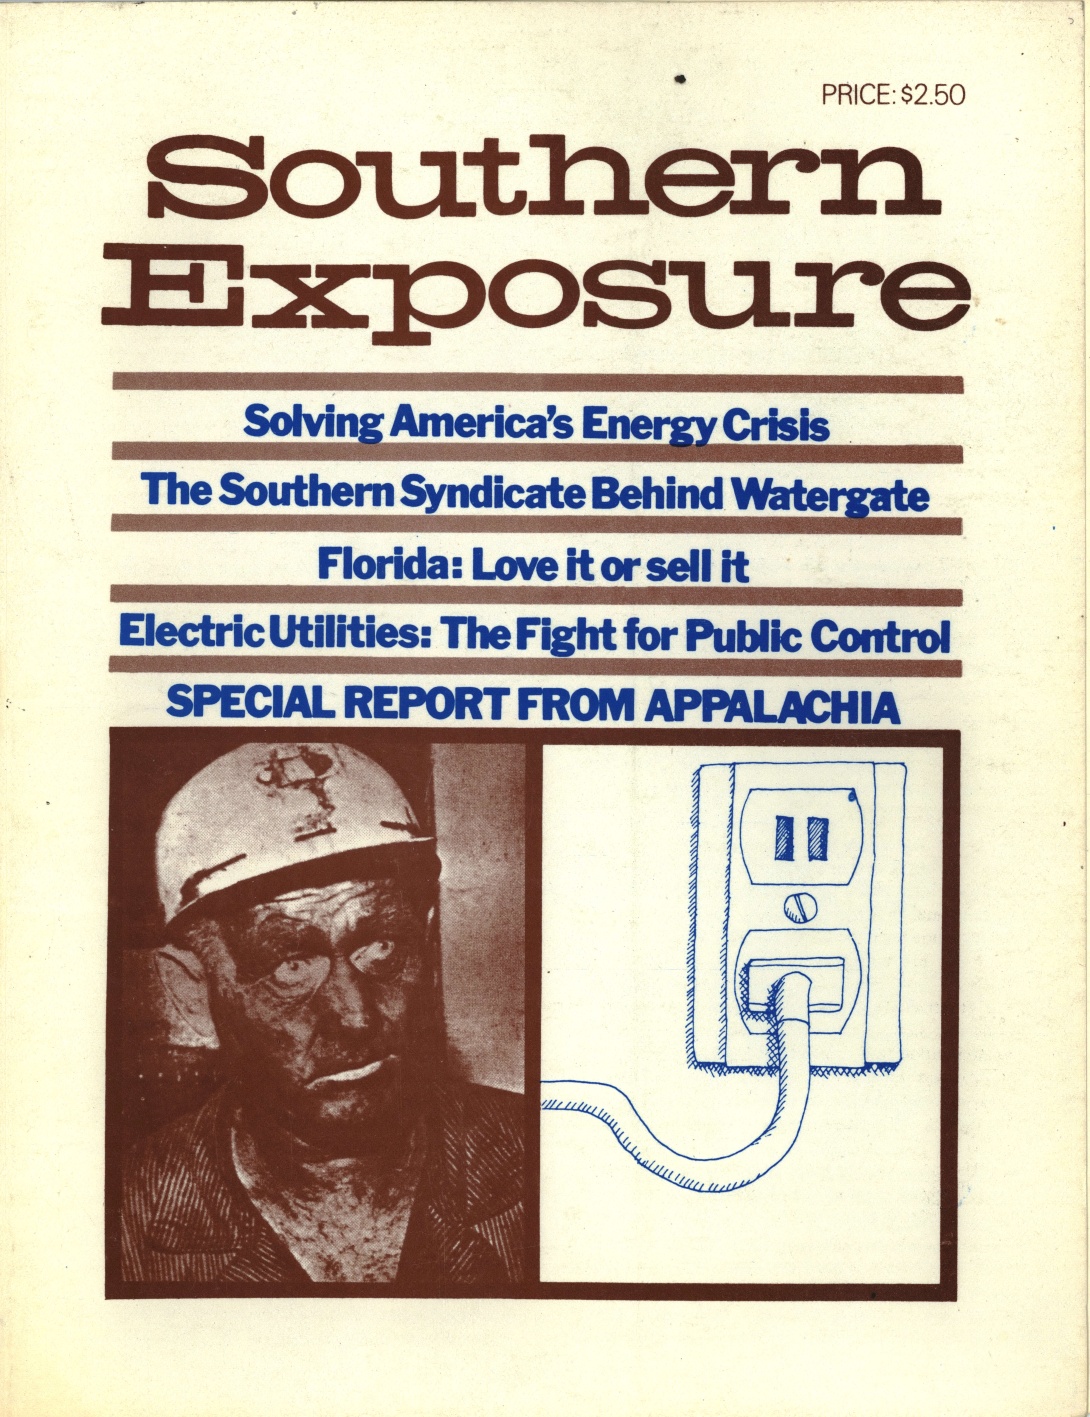 Tan cover of magazine reading "Southern Exposure: Solving America's Energy Crisis, The Southern Syndicate Behind Watergate, Florida: Love it or sell it: Electric Utilities: the fight for public control, Special Report from Appalachia." And photo of coal miner next to drawing of electrical socket.